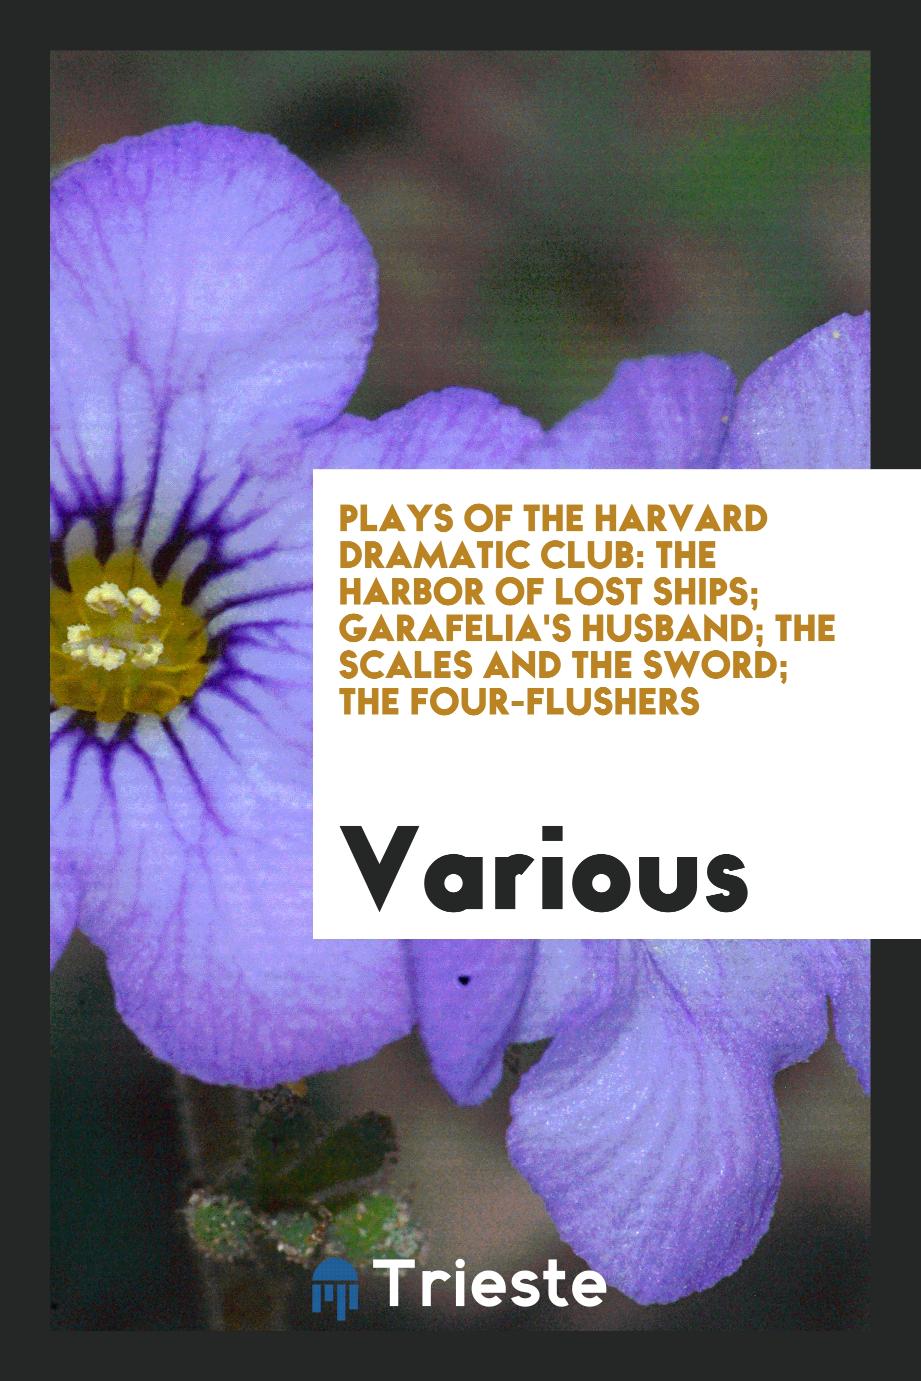 Plays of the Harvard Dramatic Club: The Harbor of Lost Ships; Garafelia's Husband; The Scales and the Sword; The Four-Flushers